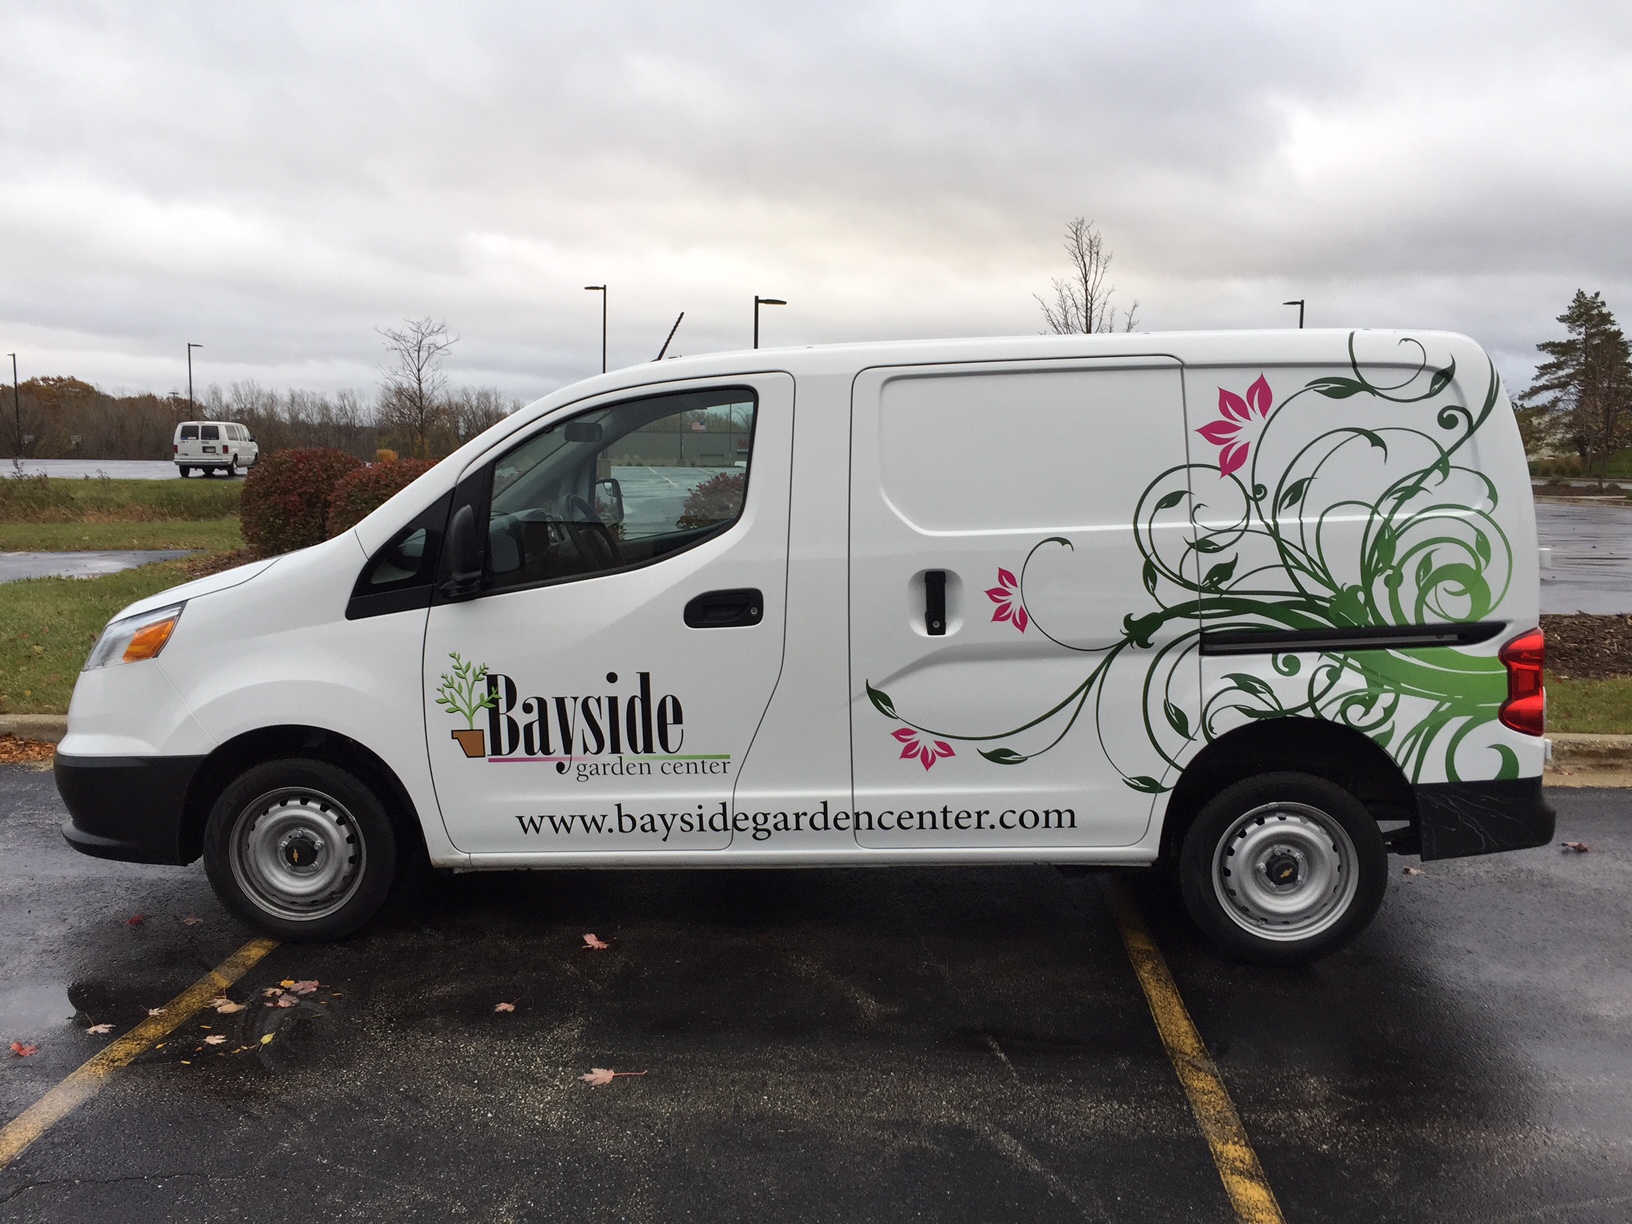 Custom Graphics On A Delivery Truck For Bayside Garden Center In